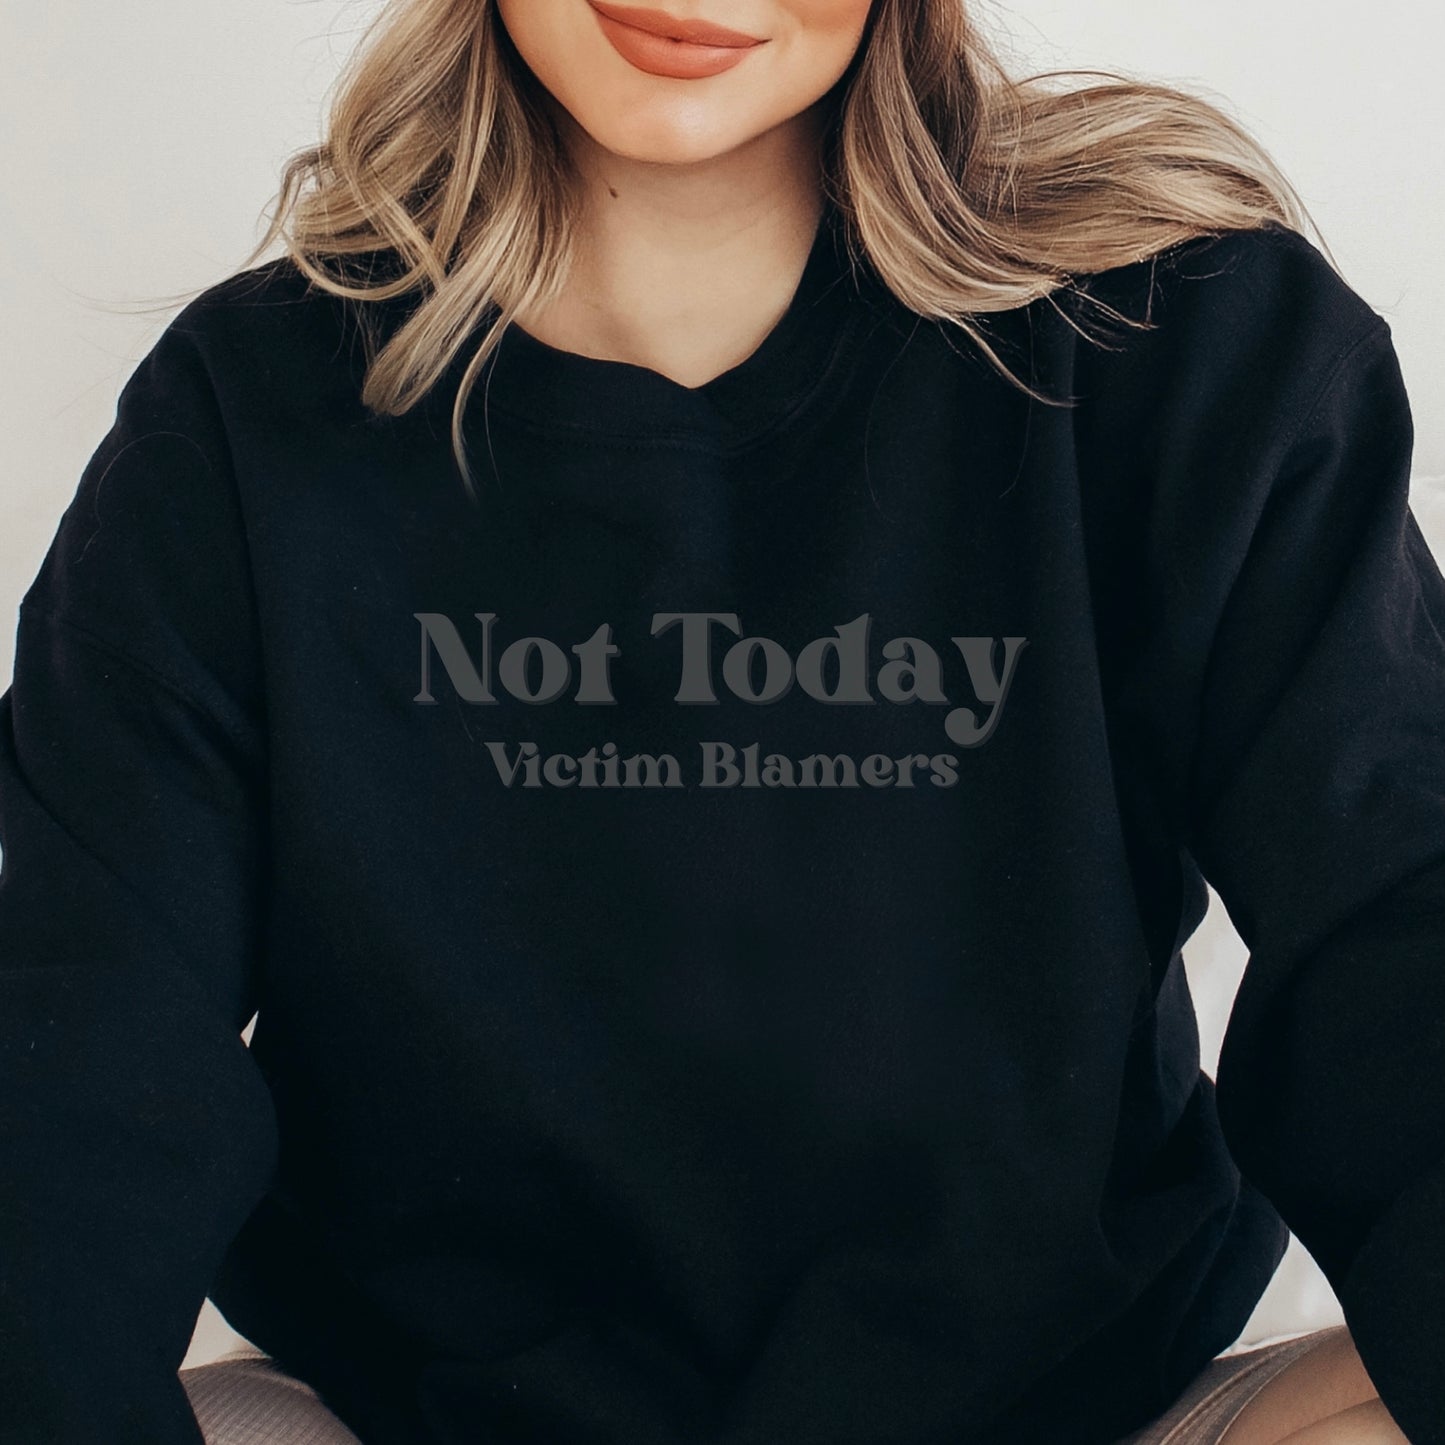 The front of the sweatshirt proudly displays the phrase "Not Today Victim Blamers" in a bold and eye-catching font. This message serves as a reminder that we reject victim-blaming and support those who have faced injustice.